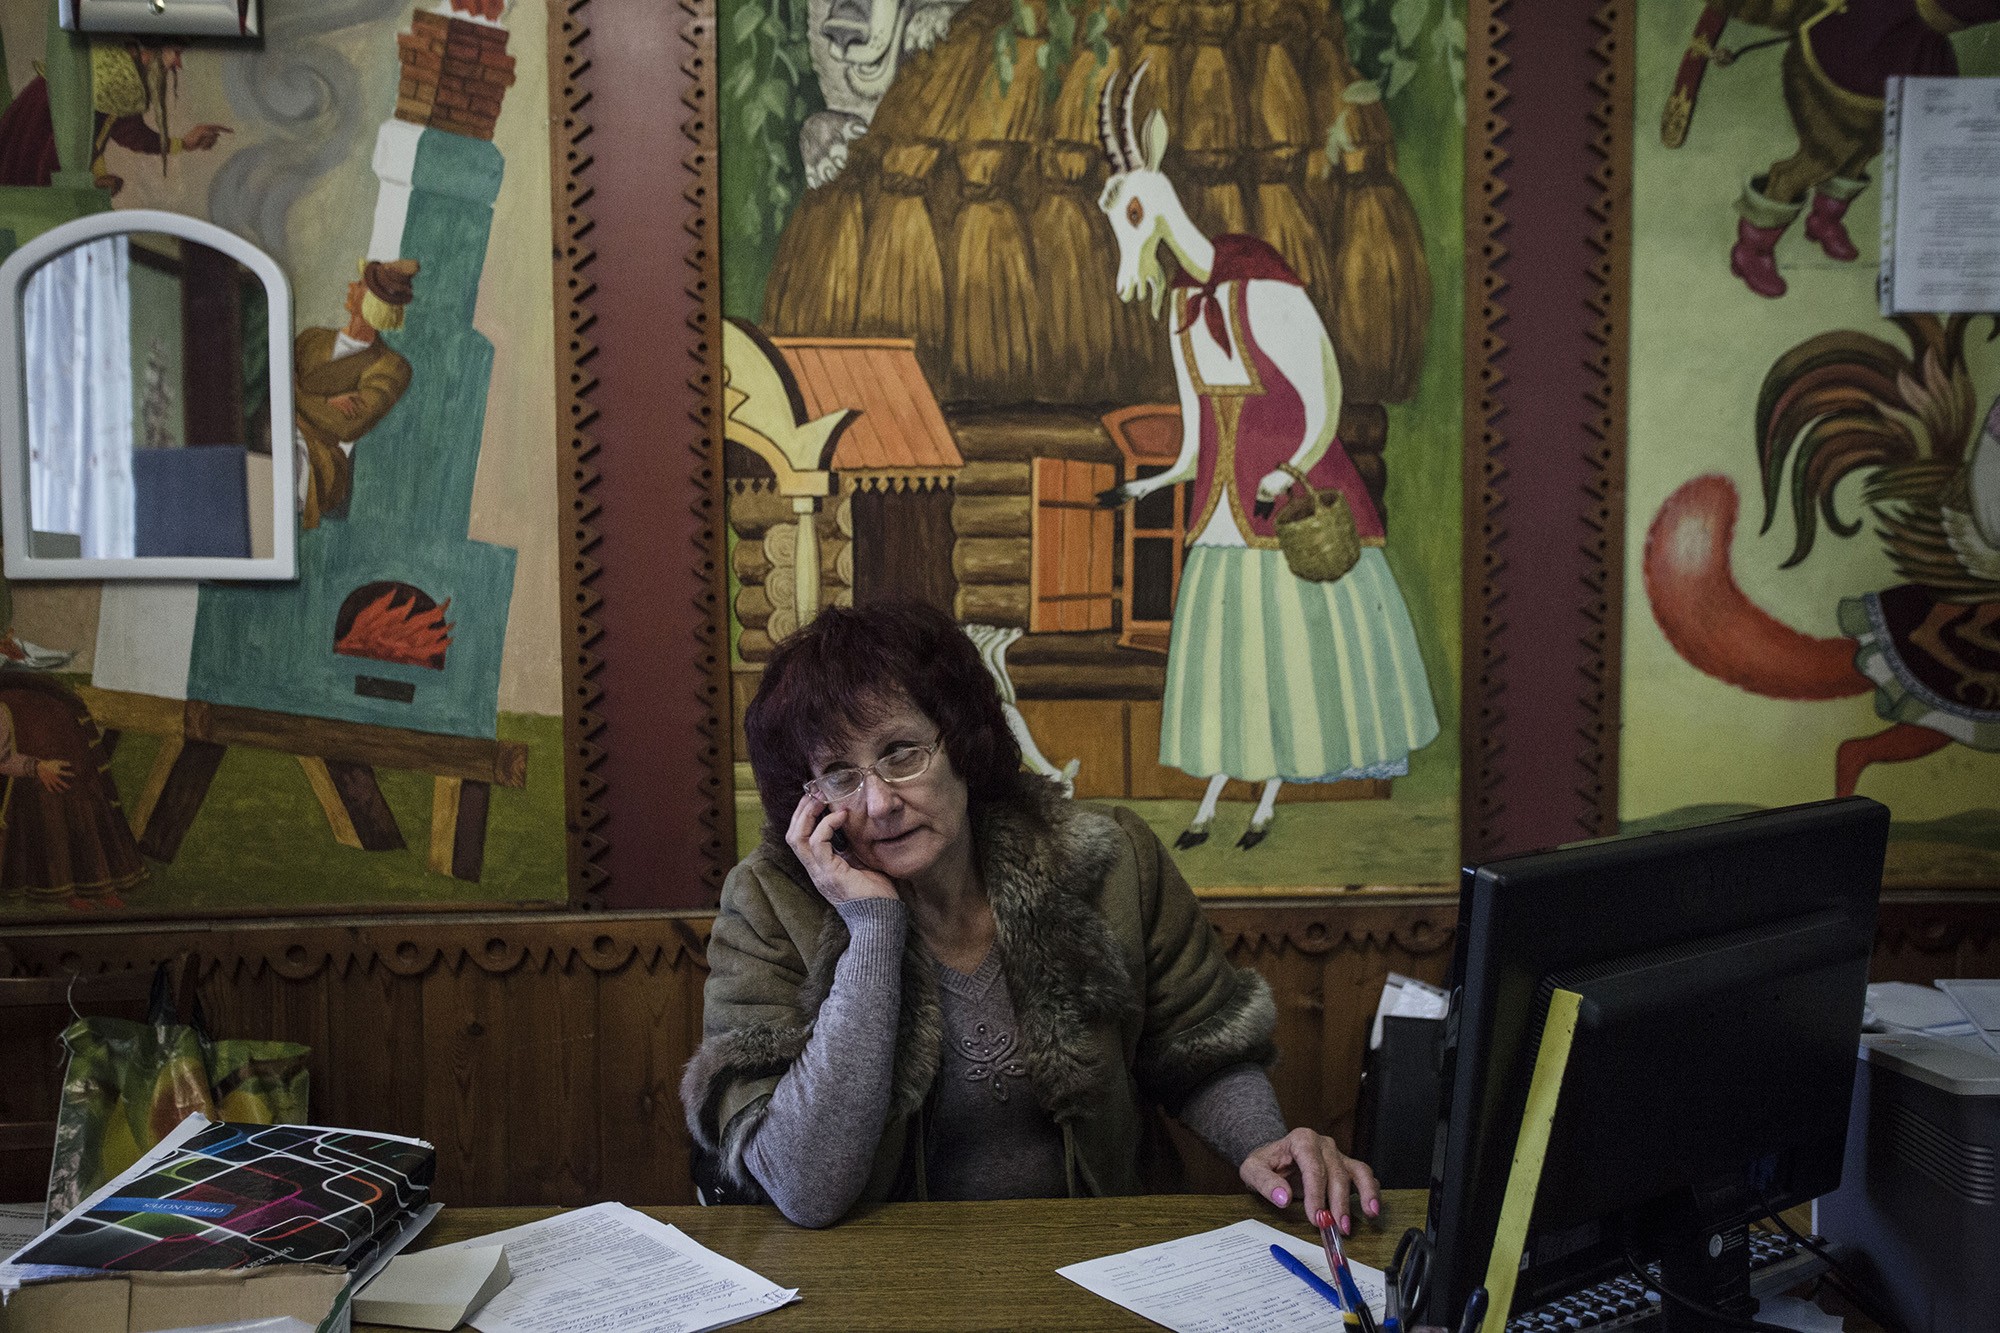 A City Hall worker sits in a Palace of Culture which is now a City Hall in Verkniotoretske, Donetsk Oblast on Nov. 28.